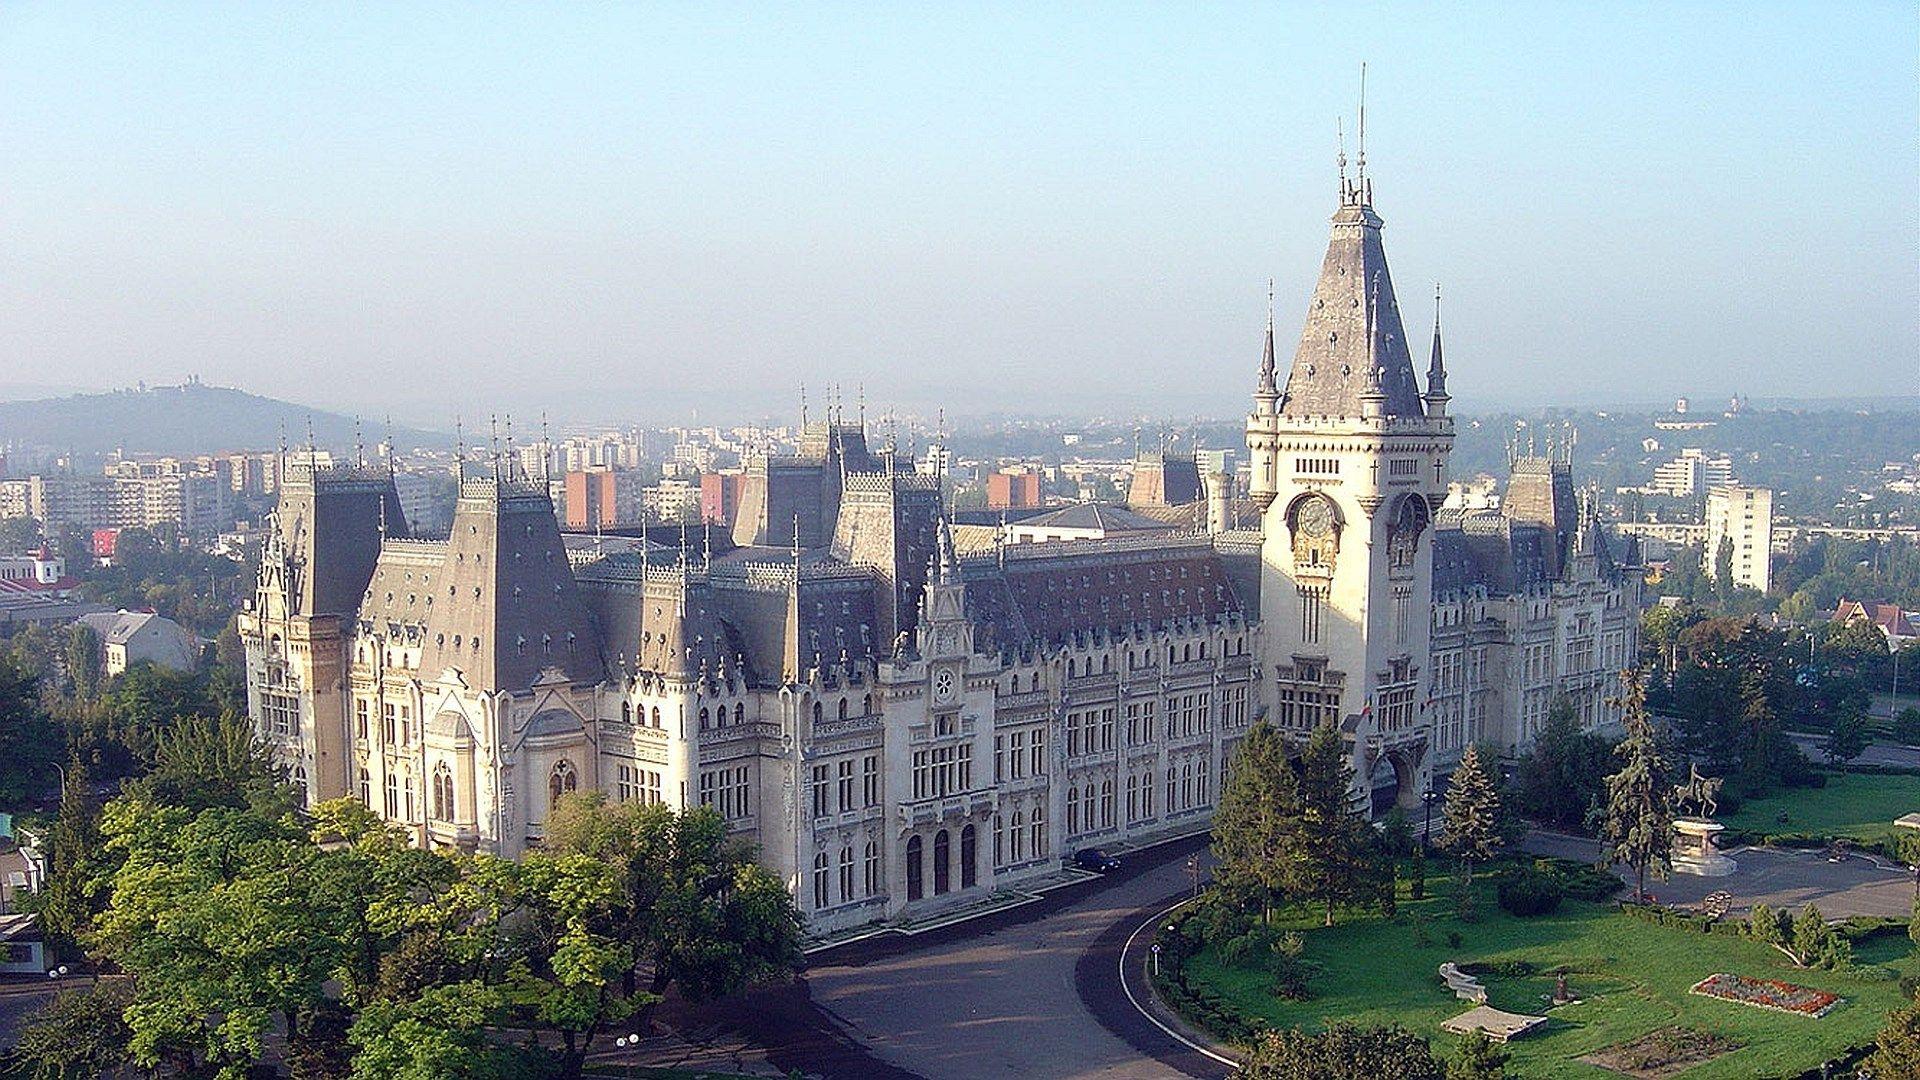 palace of culture iai, Wallpaper Collection 1920x1080. likeagod